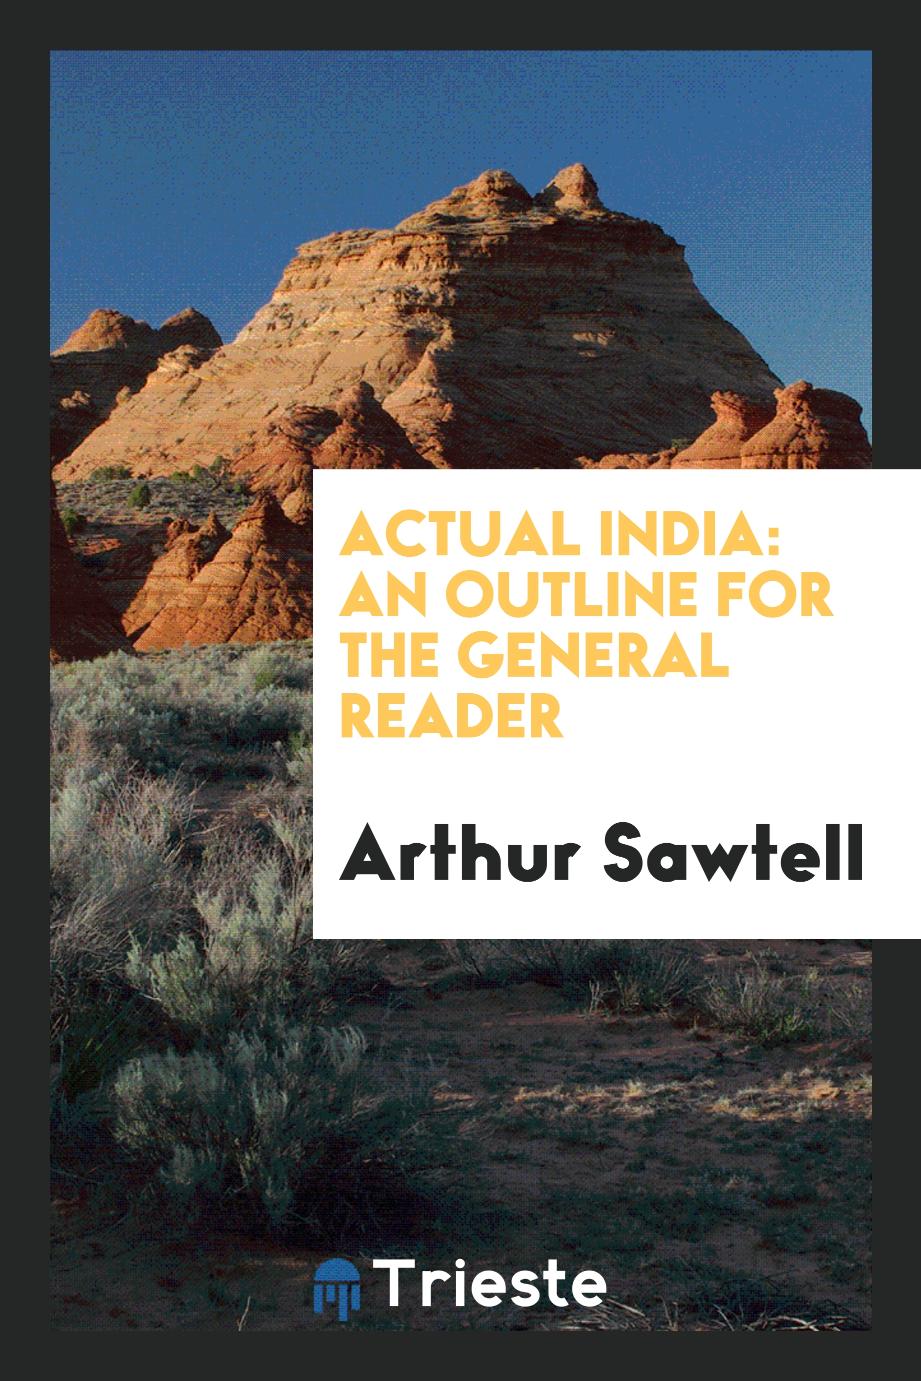 Actual India: An Outline for the General Reader